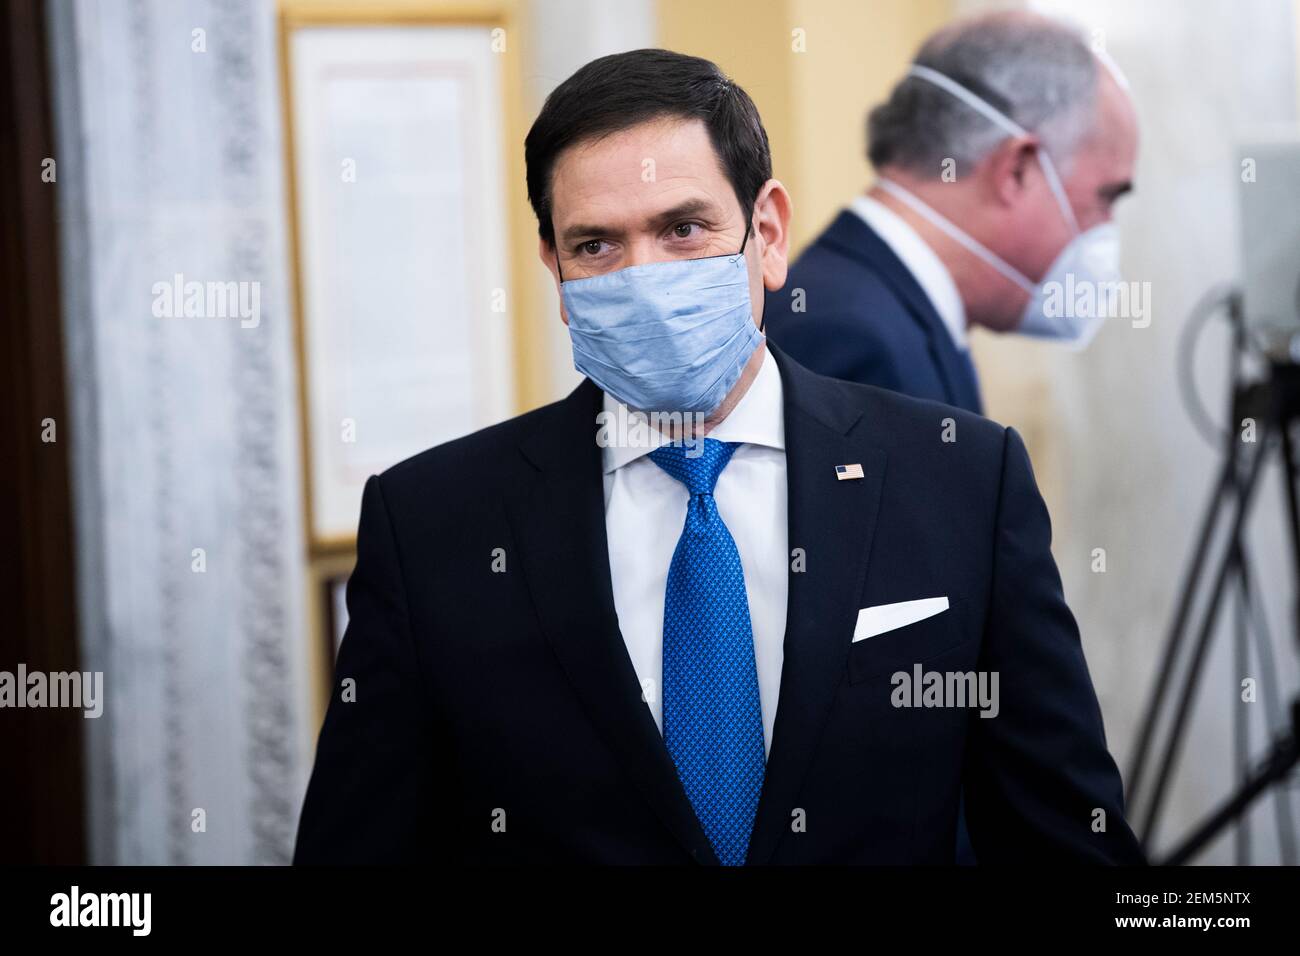 UNITED STATES - FEBRUARY 24: Vice chairman Sen. Marco Rubio, R-Fla., attends the Senate Select Intelligence Committee confirmation hearing for William Burns, nominee for Central Intelligence Agency director, in Russell Senate Office Building on Capitol Hill in Washington, D.C., on Wednesday, February 24, 2021. Sen. Bob Casey, D-Pa., is seen at right. (Photo By Tom Williams/Pool/Sipa USA) Stock Photo